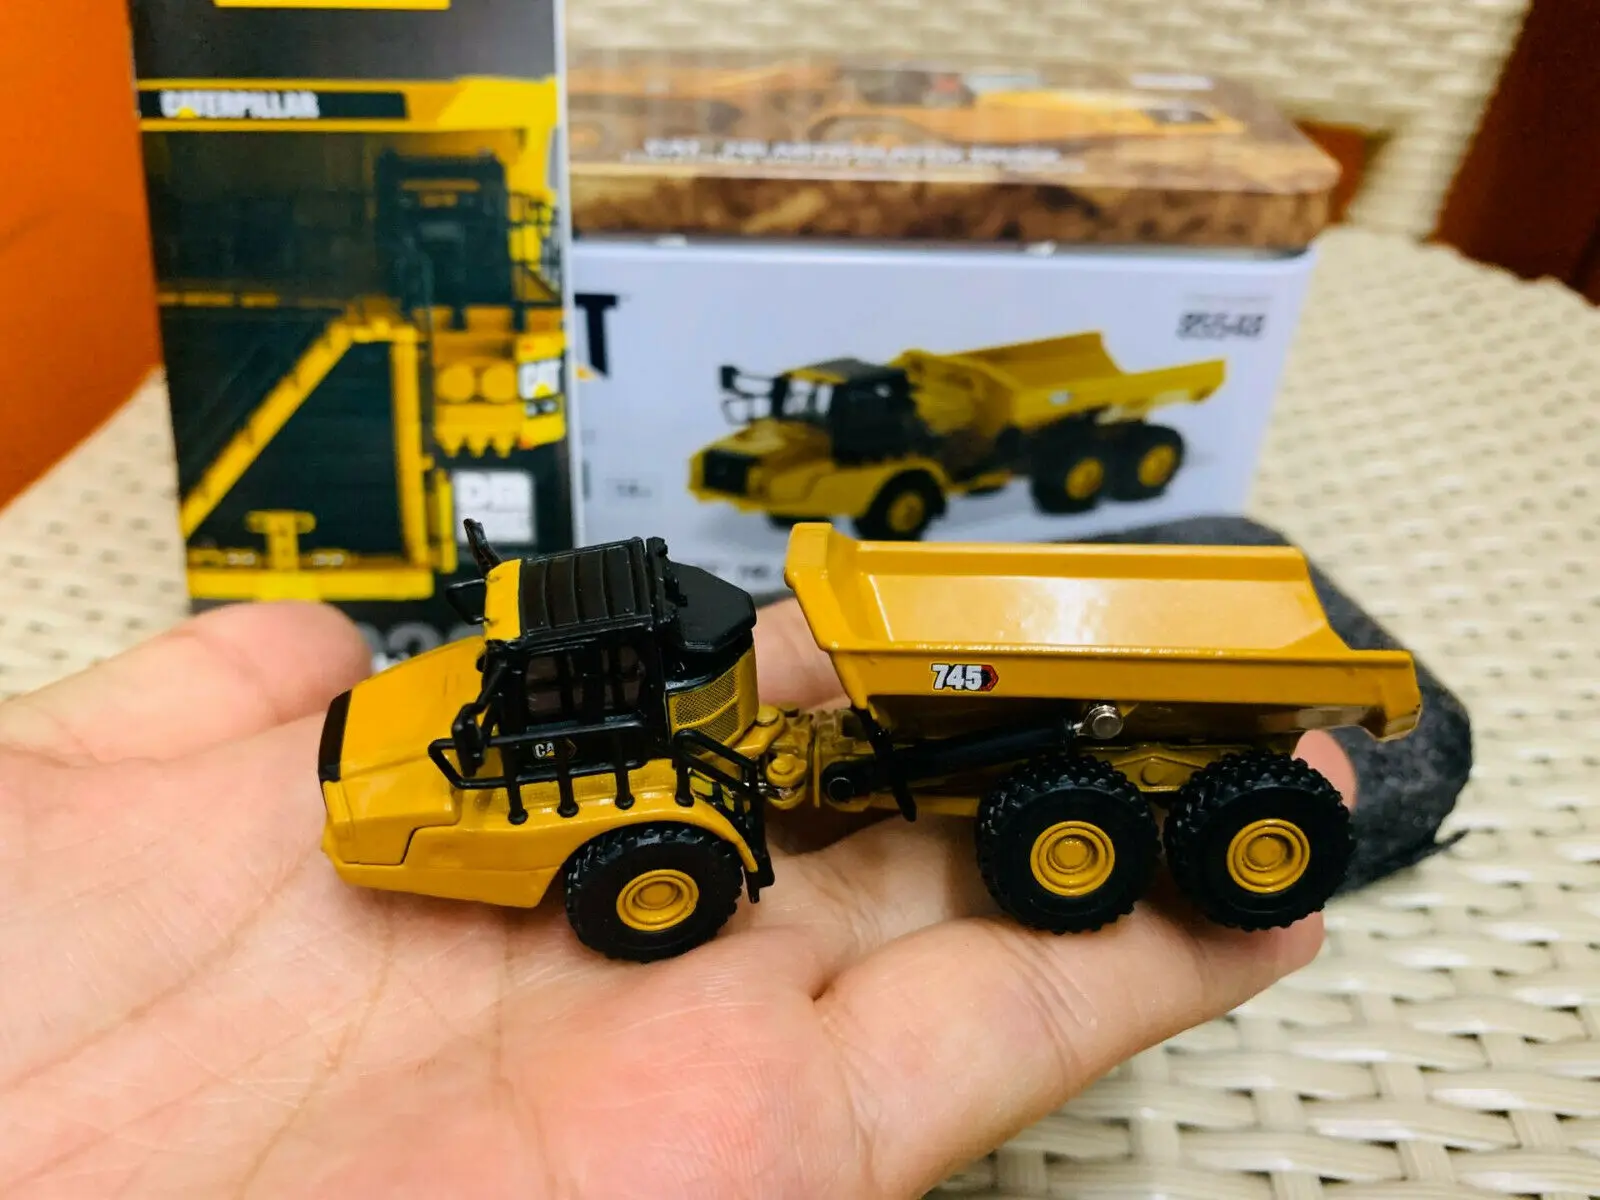 

Caterpillar Cat 745 Articulated Truck 1:125 Scale Metal Model By DieCast Masters DM85548 New in Box